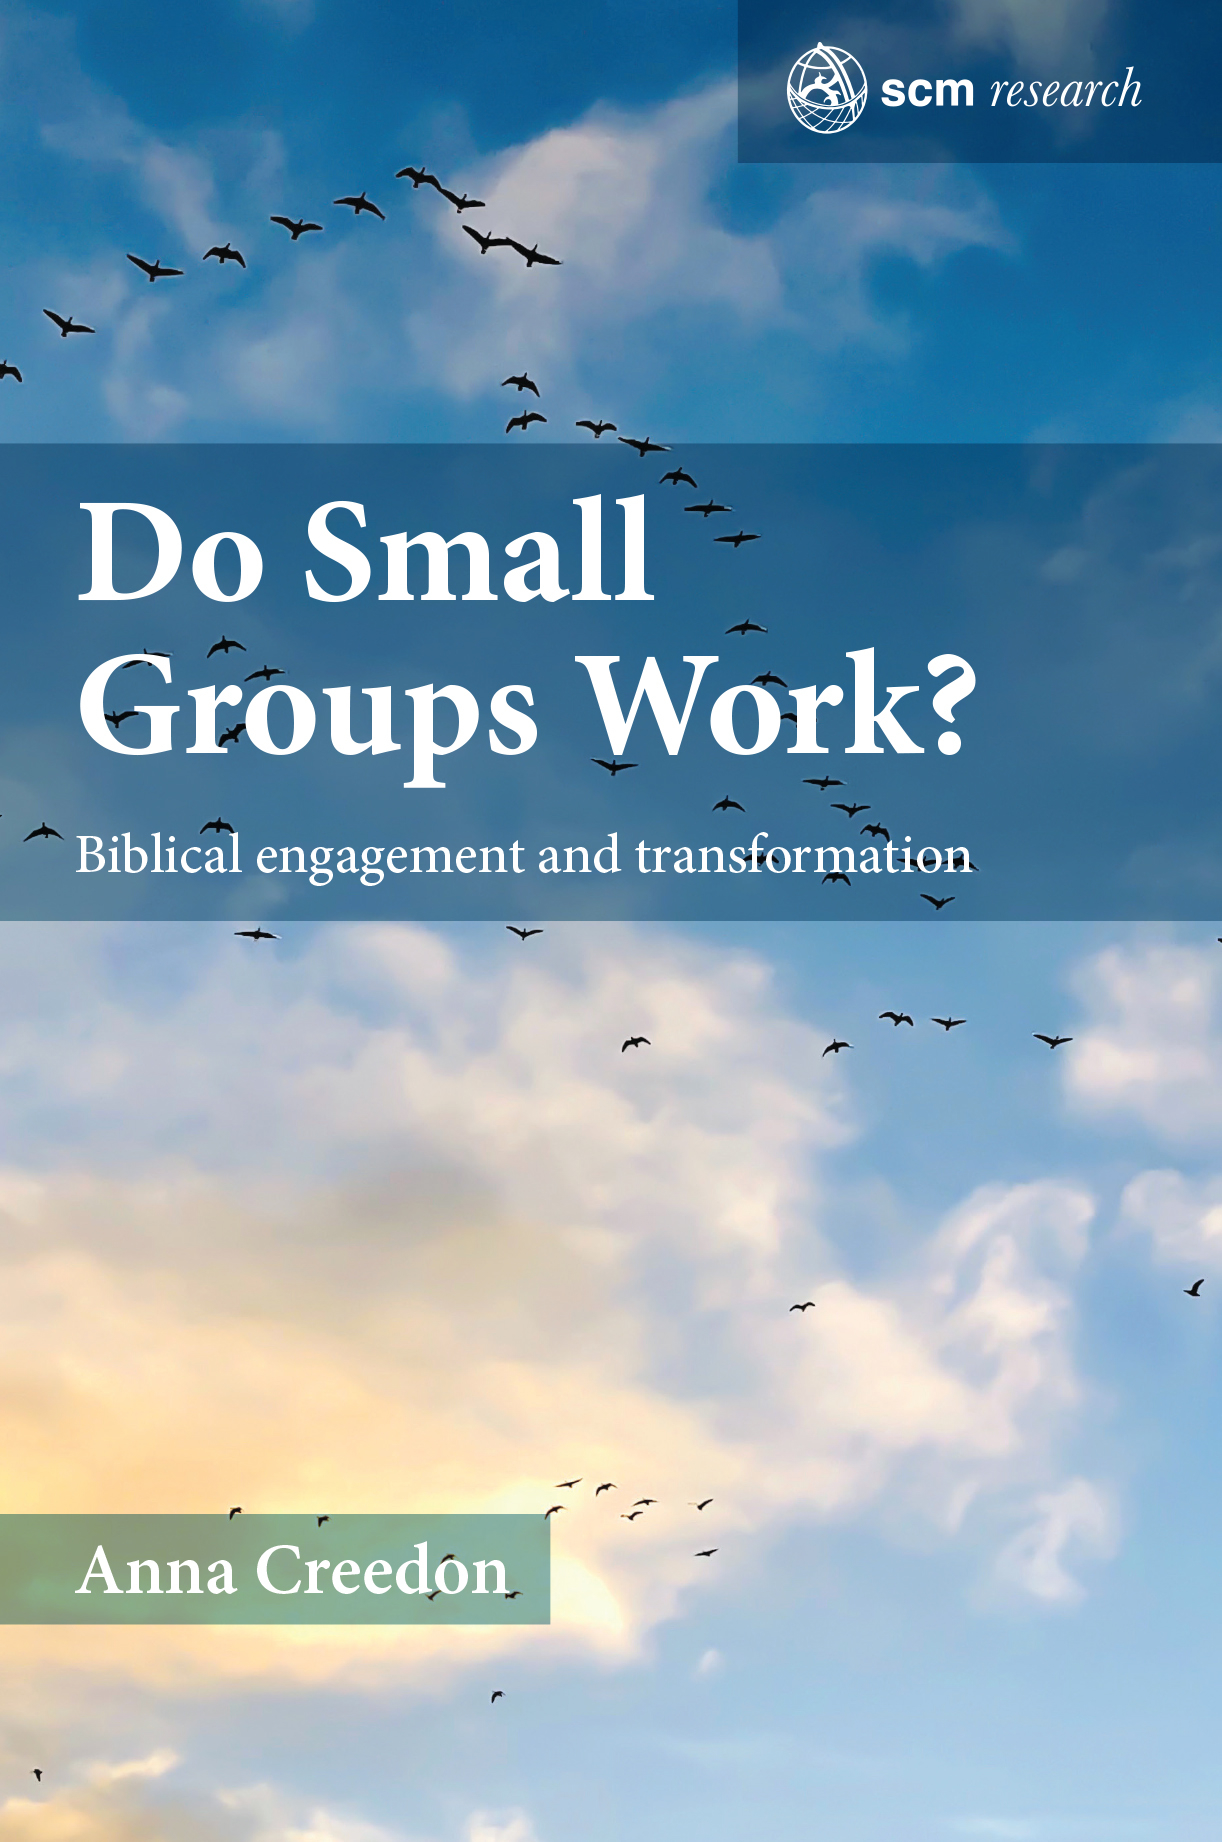 Do Small Groups Work?